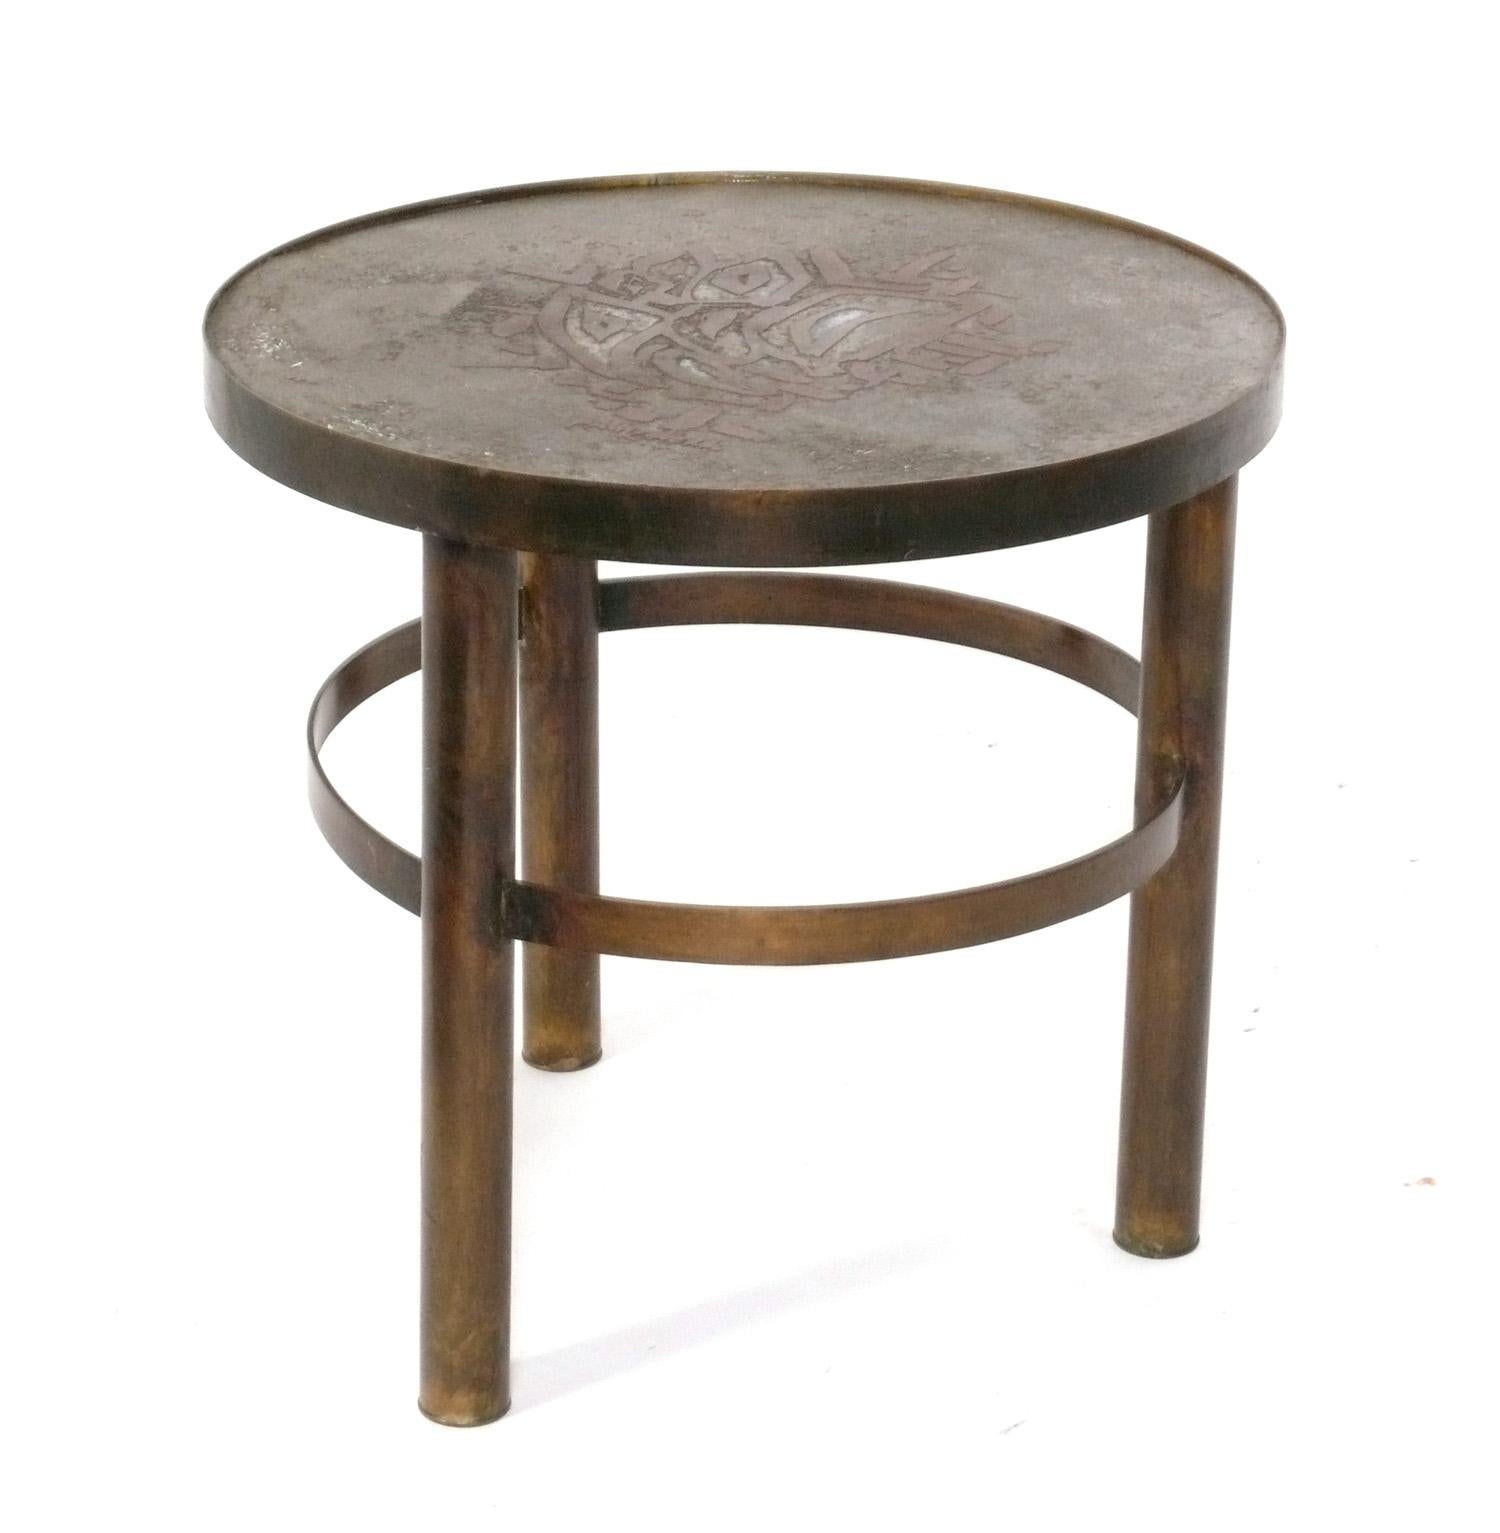 Philip and Kelvin Laverne Pewter and Bronze Side Table with Rare Abstract Design, American, circa 1960s. It is signed to the top, see last photo. This table is a versatile size and can be used as a side or end table, nightstand, or also perfect